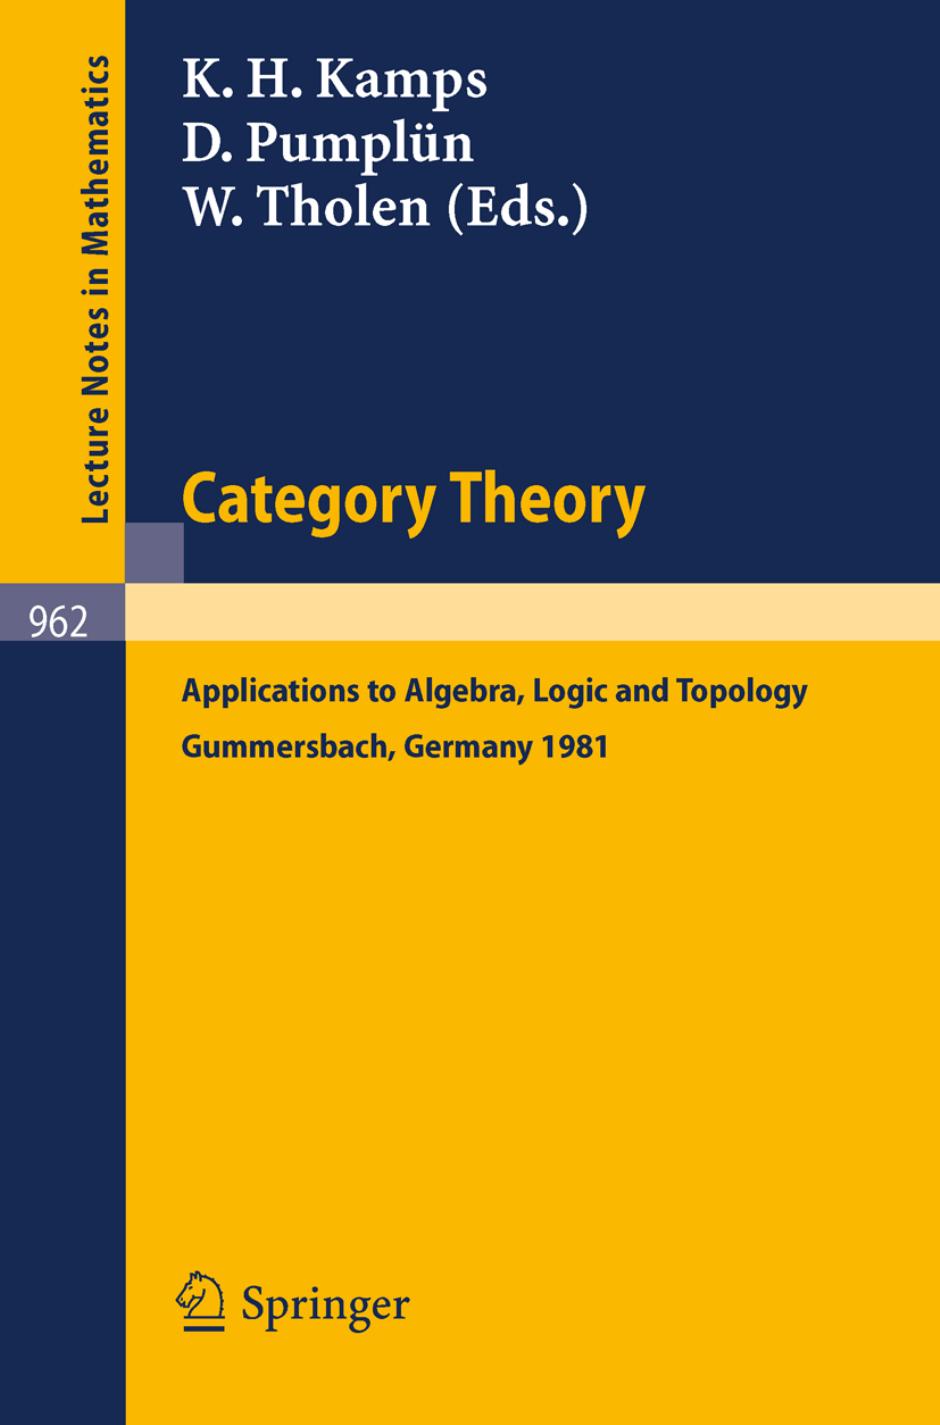 Category Theory: Applications to Algebra, Logic and Topology. Proceedings of the International Conference Held at Gummersbach, July 6-10, 1981